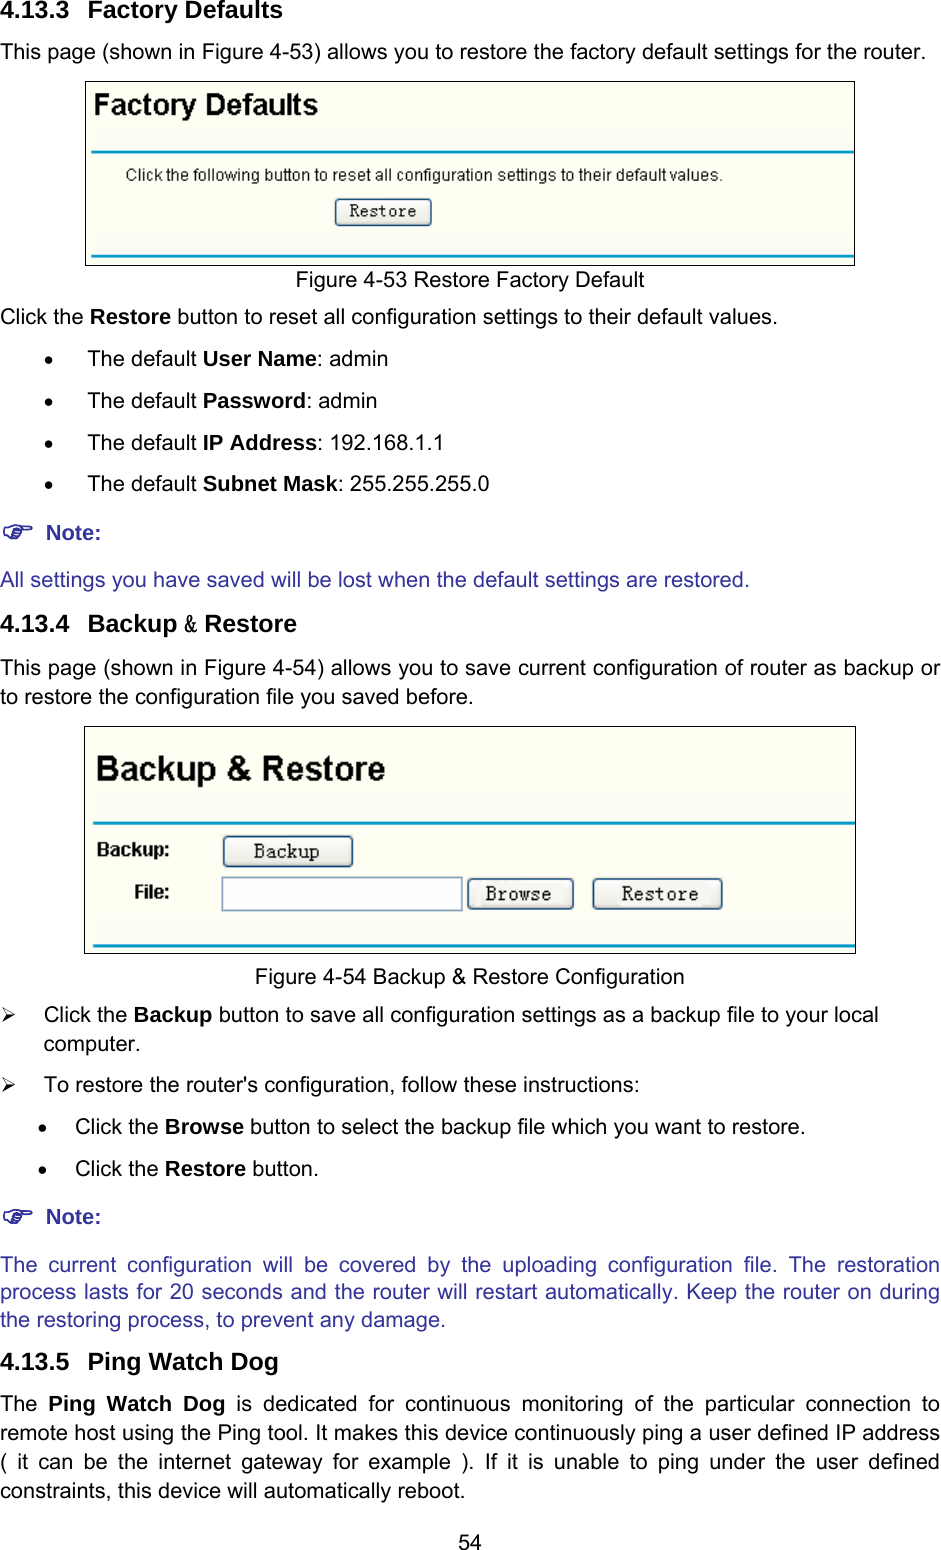  54 4.13.3  Factory Defaults This page (shown in Figure 4-53) allows you to restore the factory default settings for the router.  Figure 4-53 Restore Factory Default Click the Restore button to reset all configuration settings to their default values.   • The default User Name: admin • The default Password: admin • The default IP Address: 192.168.1.1 • The default Subnet Mask: 255.255.255.0 ) Note: All settings you have saved will be lost when the default settings are restored. 4.13.4  Backup &amp; Restore This page (shown in Figure 4-54) allows you to save current configuration of router as backup or to restore the configuration file you saved before.  Figure 4-54 Backup &amp; Restore Configuration ¾ Click the Backup button to save all configuration settings as a backup file to your local computer.  ¾ To restore the router&apos;s configuration, follow these instructions: • Click the Browse button to select the backup file which you want to restore.   • Click the Restore button.   ) Note: The current configuration will be covered by the uploading configuration file. The restoration process lasts for 20 seconds and the router will restart automatically. Keep the router on during the restoring process, to prevent any damage.   4.13.5  Ping Watch Dog The  Ping Watch Dog is dedicated for continuous monitoring of the particular connection to remote host using the Ping tool. It makes this device continuously ping a user defined IP address ( it can be the internet gateway for example ). If it is unable to ping under the user defined constraints, this device will automatically reboot. 